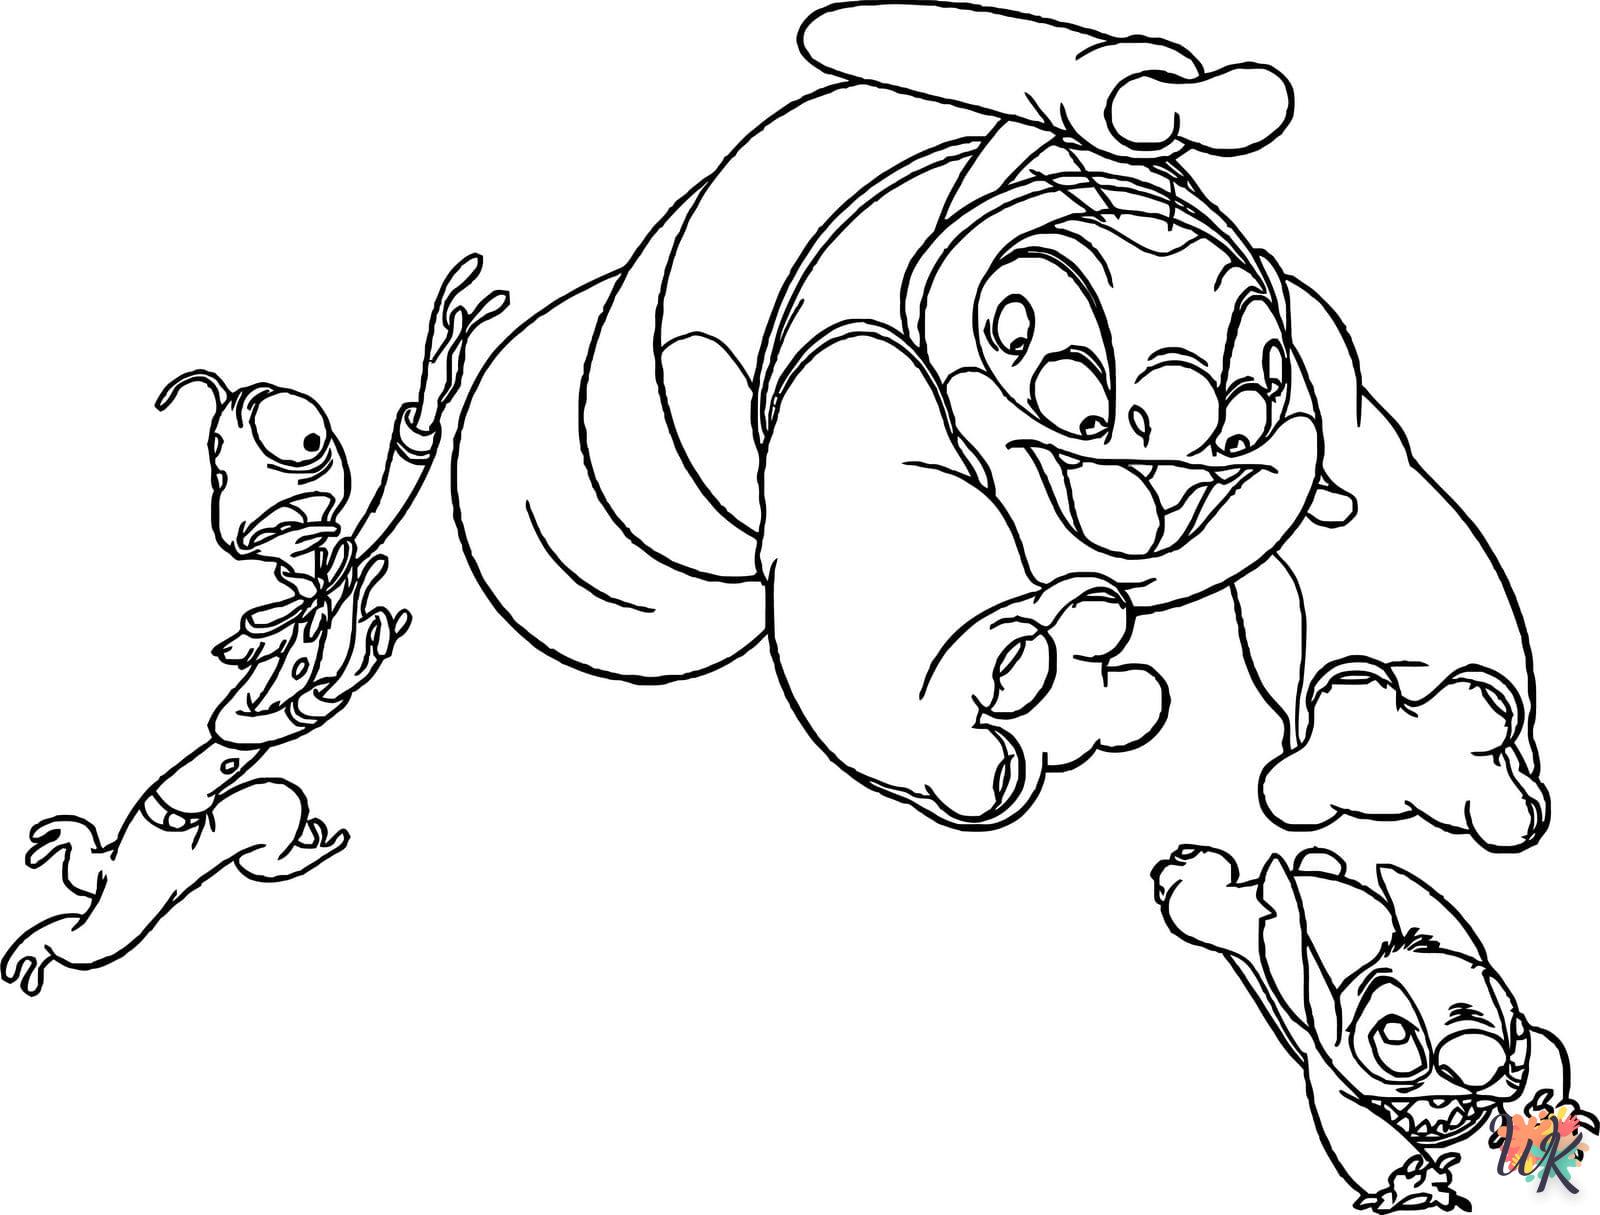 Disney animals coloring page for children to print 1